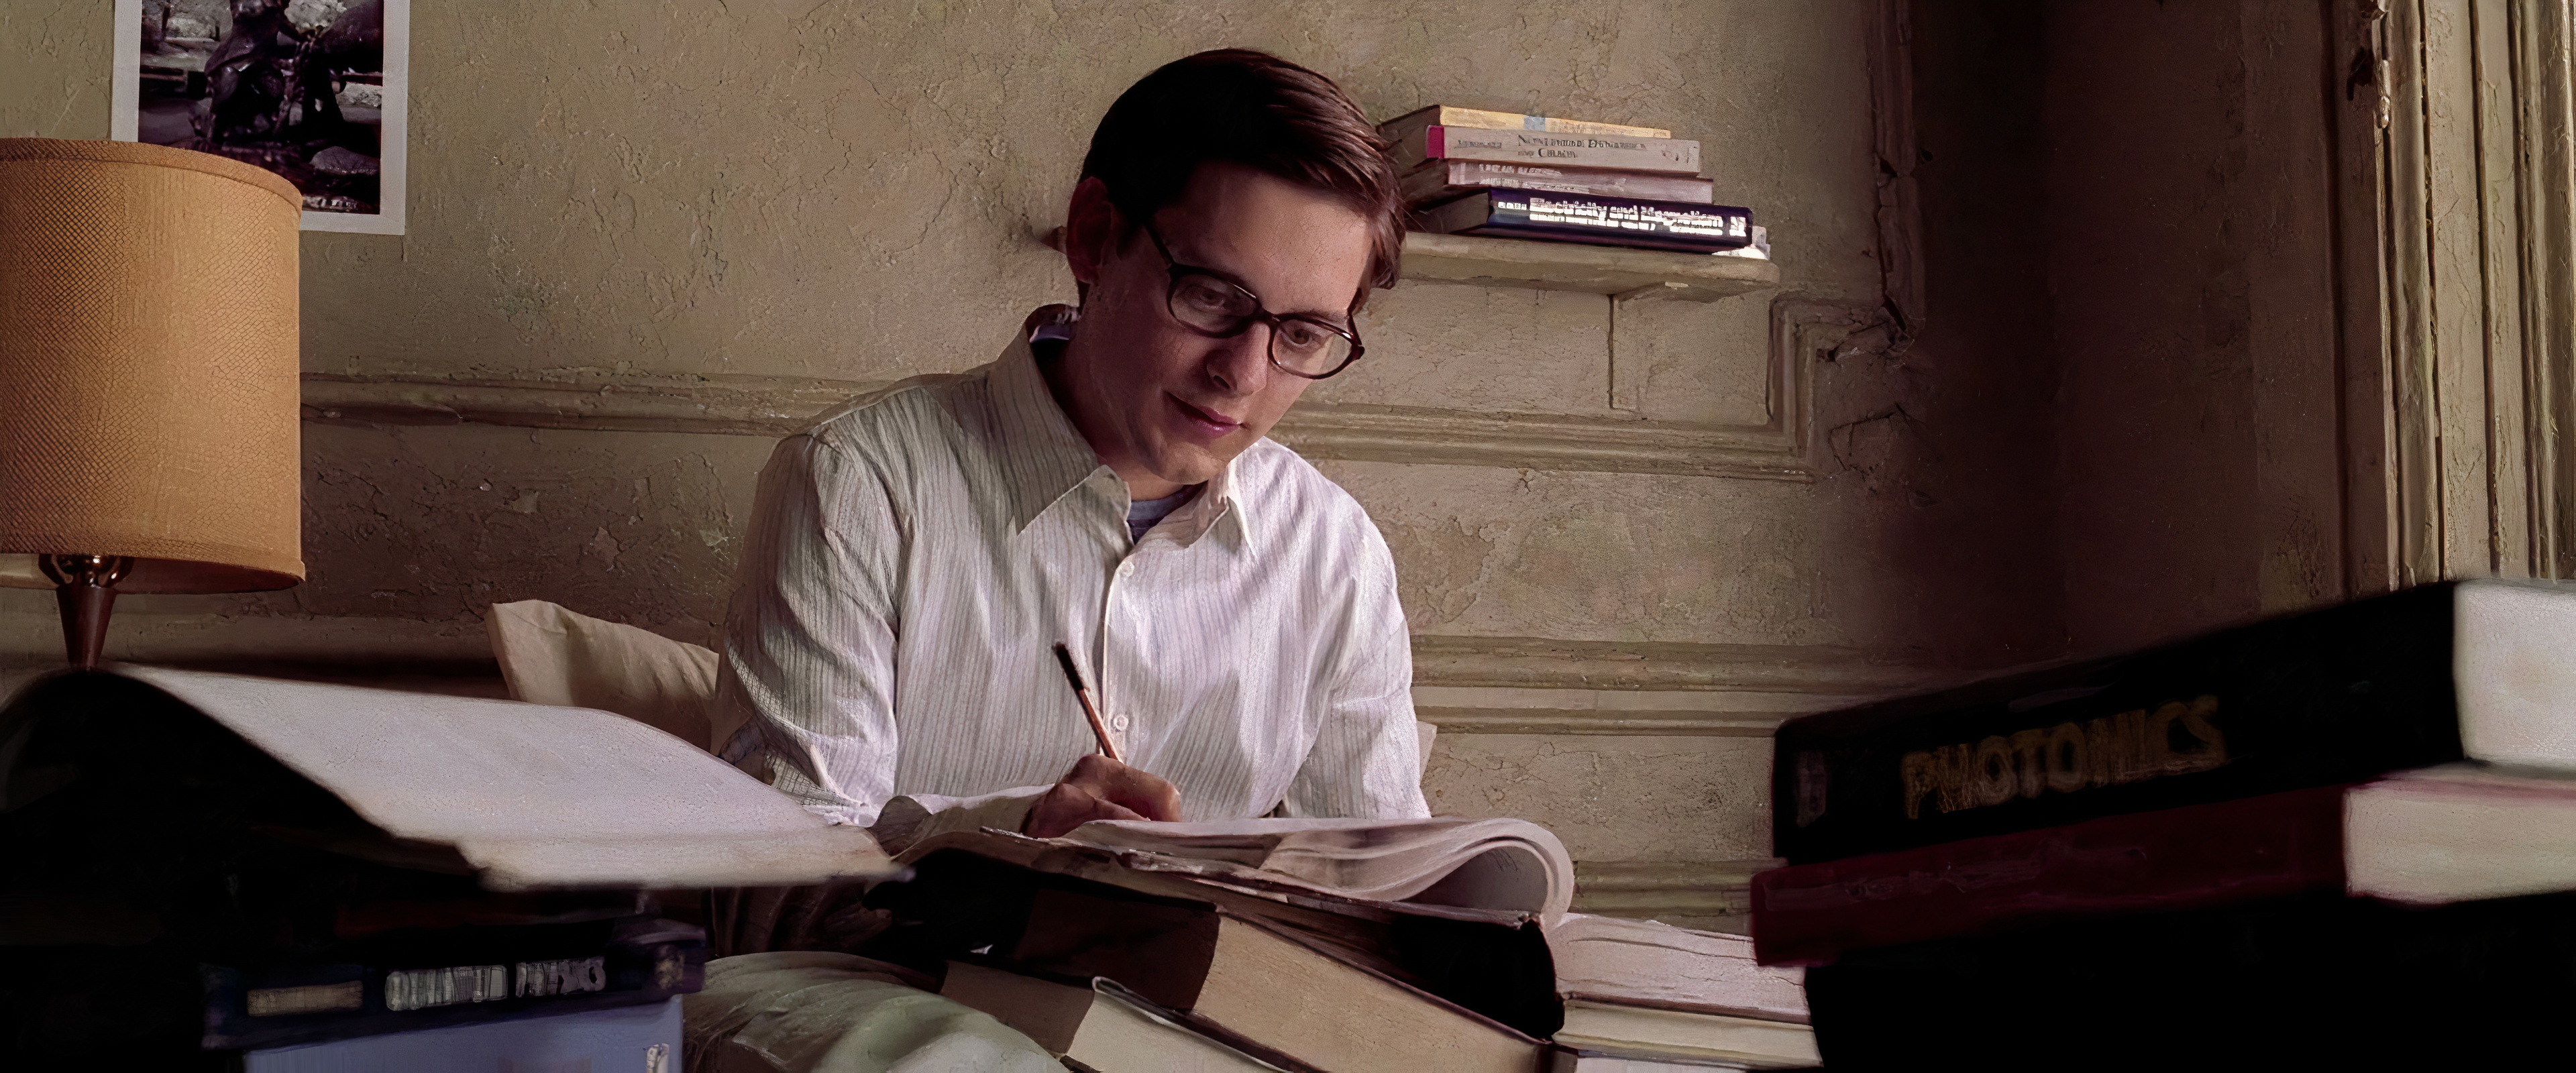 Peter Parker studying